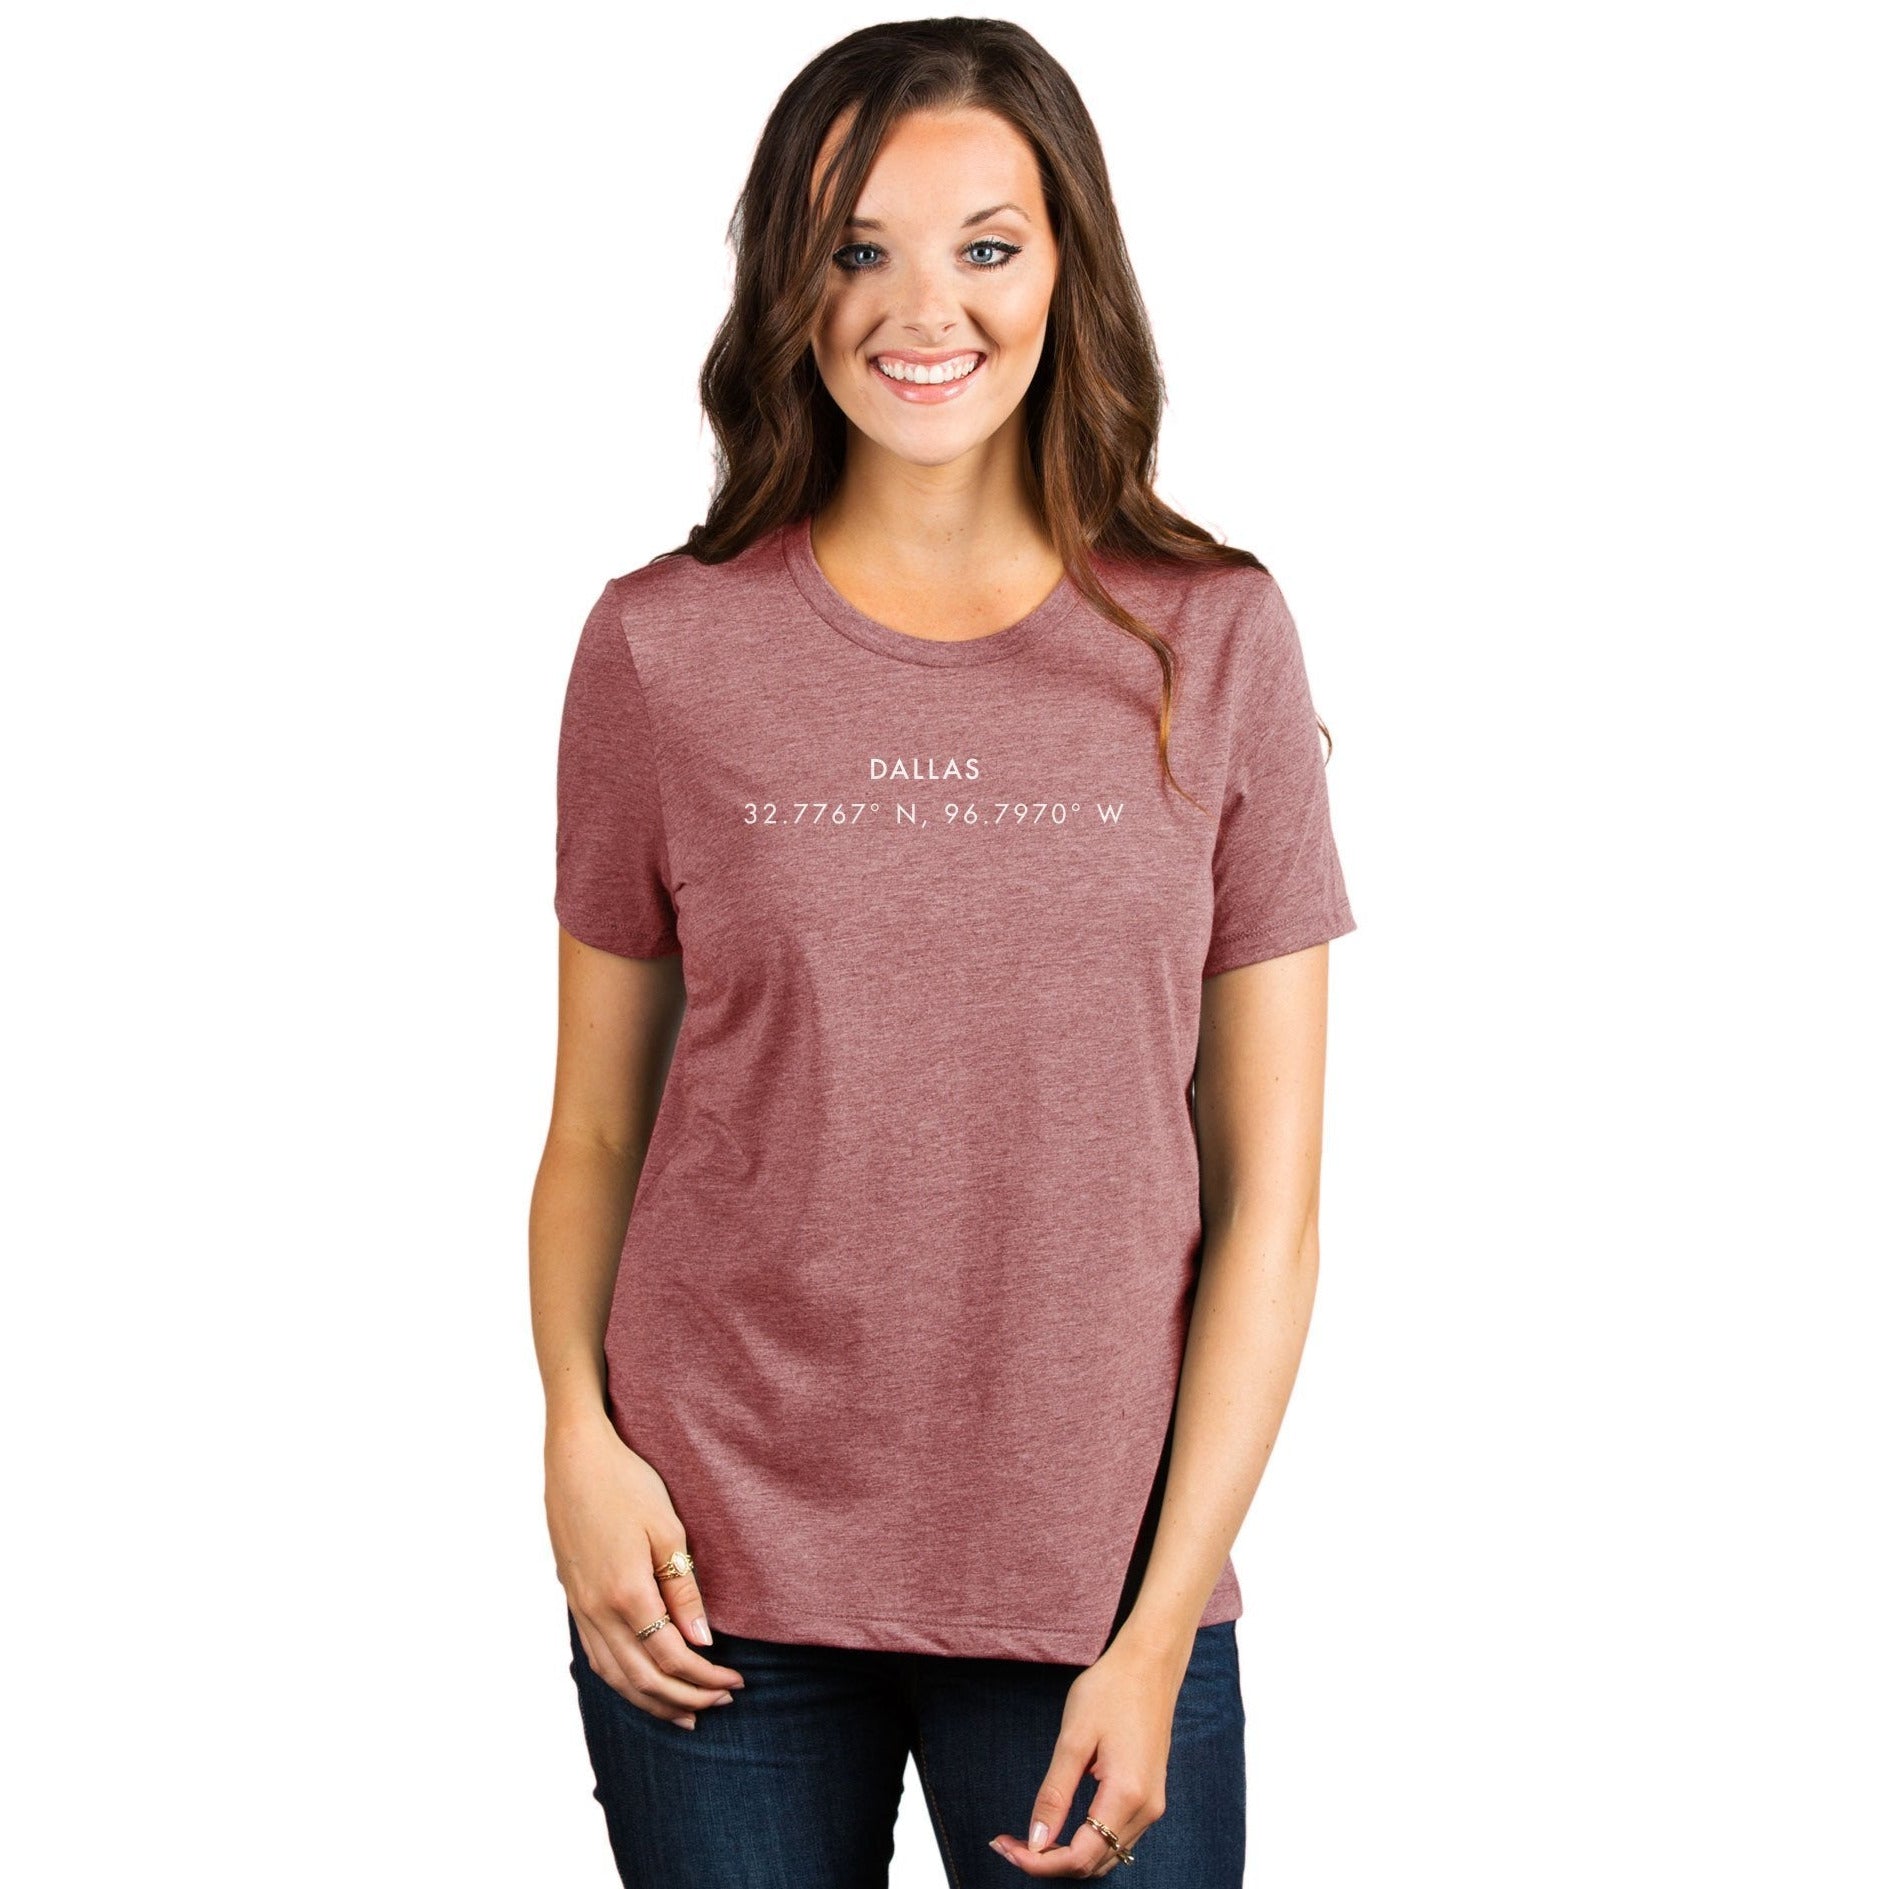 Dallas Texas Coordinates Women's Relaxed Crewneck T-Shirt Top Tee Heather Rouge Model
